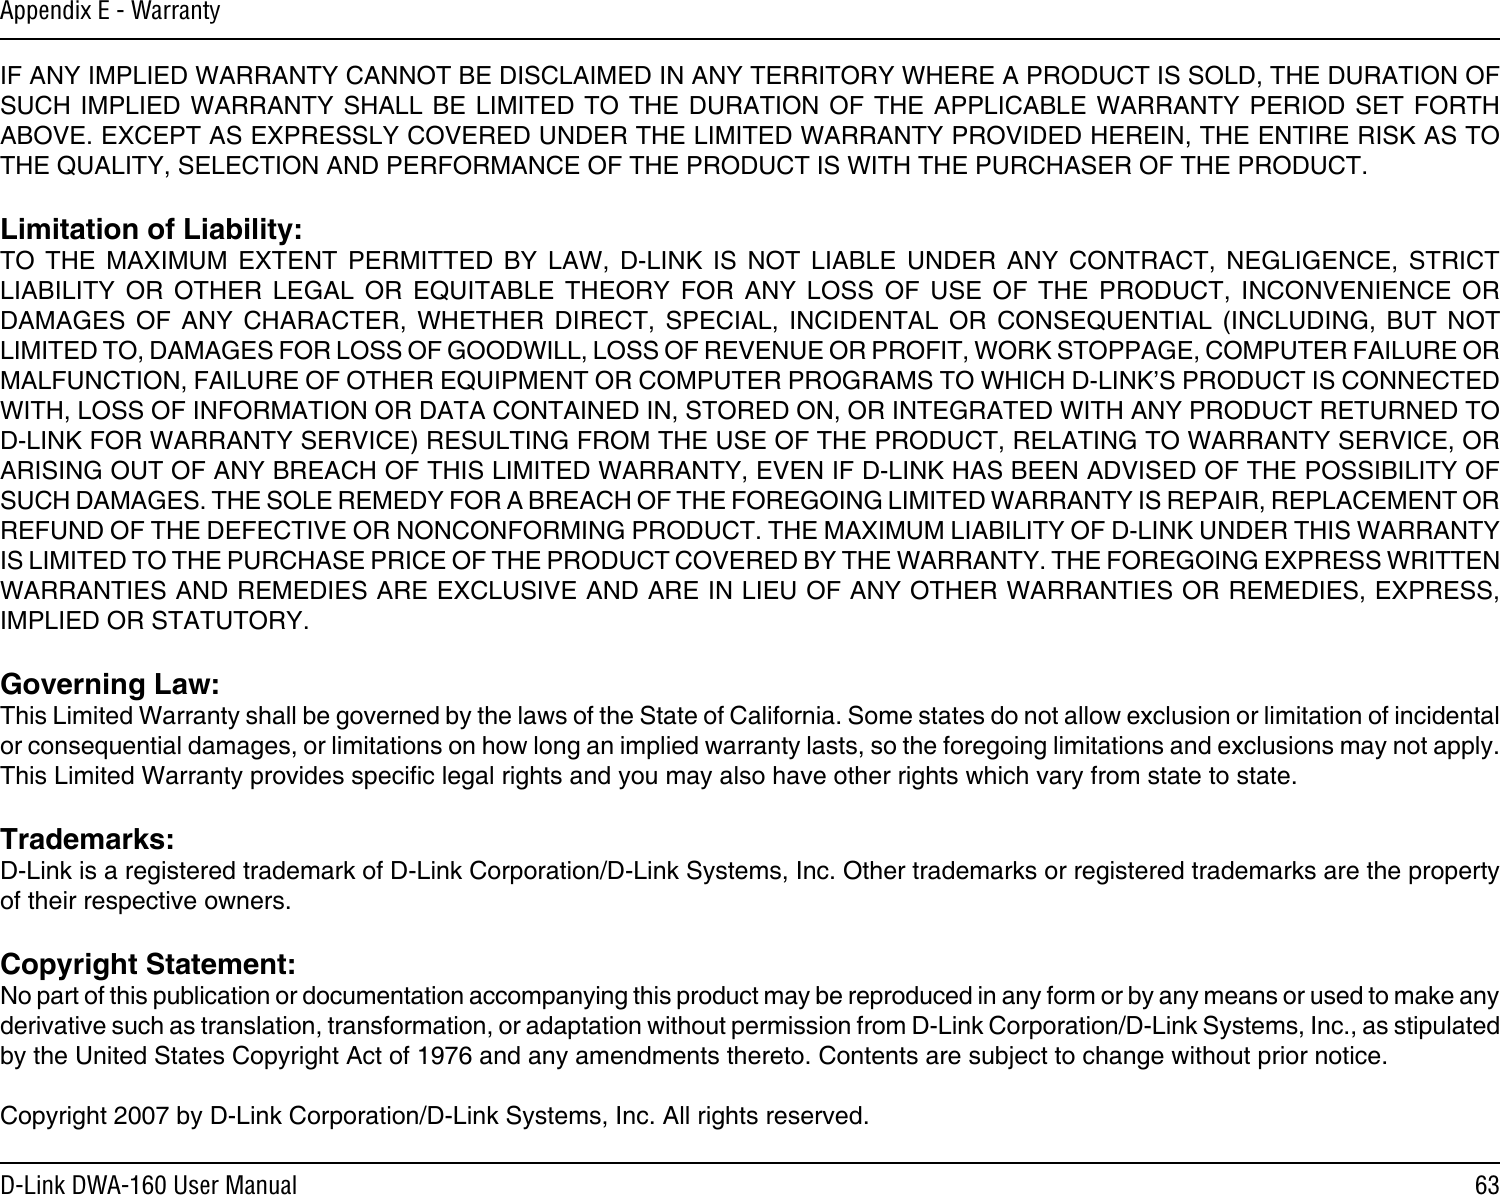 63D-Link DWA-160 User ManualAppendix E - WarrantyIF ANY IMPLIED WARRANTY CANNOT BE DISCLAIMED IN ANY TERRITORY WHERE A PRODUCT IS SOLD, THE DURATION OF SUCH IMPLIED  WARRANTY SHALL  BE  LIMITED TO  THE  DURATION OF  THE APPLICABLE WARRANTY  PERIOD SET  FORTH ABOVE. EXCEPT AS EXPRESSLY COVERED UNDER THE LIMITED WARRANTY PROVIDED HEREIN, THE ENTIRE RISK AS TO THE QUALITY, SELECTION AND PERFORMANCE OF THE PRODUCT IS WITH THE PURCHASER OF THE PRODUCT.Limitation of Liability:TO  THE  MAXIMUM  EXTENT  PERMITTED  BY  LAW,  D-LINK  IS  NOT  LIABLE  UNDER  ANY  CONTRACT,  NEGLIGENCE,  STRICT LIABILITY  OR  OTHER  LEGAL  OR  EQUITABLE  THEORY  FOR  ANY  LOSS  OF  USE  OF  THE  PRODUCT,  INCONVENIENCE  OR DAMAGES  OF  ANY  CHARACTER,  WHETHER  DIRECT,  SPECIAL,  INCIDENTAL  OR  CONSEQUENTIAL  (INCLUDING,  BUT  NOT LIMITED TO, DAMAGES FOR LOSS OF GOODWILL, LOSS OF REVENUE OR PROFIT, WORK STOPPAGE, COMPUTER FAILURE OR MALFUNCTION, FAILURE OF OTHER EQUIPMENT OR COMPUTER PROGRAMS TO WHICH D-LINK’S PRODUCT IS CONNECTED WITH, LOSS OF INFORMATION OR DATA CONTAINED IN, STORED ON, OR INTEGRATED WITH ANY PRODUCT RETURNED TO D-LINK FOR WARRANTY SERVICE) RESULTING FROM THE USE OF THE PRODUCT, RELATING TO WARRANTY SERVICE, OR ARISING OUT OF ANY BREACH OF THIS LIMITED WARRANTY, EVEN IF D-LINK HAS BEEN ADVISED OF THE POSSIBILITY OF SUCH DAMAGES. THE SOLE REMEDY FOR A BREACH OF THE FOREGOING LIMITED WARRANTY IS REPAIR, REPLACEMENT OR REFUND OF THE DEFECTIVE OR NONCONFORMING PRODUCT. THE MAXIMUM LIABILITY OF D-LINK UNDER THIS WARRANTY IS LIMITED TO THE PURCHASE PRICE OF THE PRODUCT COVERED BY THE WARRANTY. THE FOREGOING EXPRESS WRITTEN WARRANTIES AND REMEDIES ARE EXCLUSIVE AND ARE IN LIEU OF ANY OTHER WARRANTIES OR REMEDIES, EXPRESS, IMPLIED OR STATUTORY.Governing Law:This Limited Warranty shall be governed by the laws of the State of California. Some states do not allow exclusion or limitation of incidental or consequential damages, or limitations on how long an implied warranty lasts, so the foregoing limitations and exclusions may not apply. This Limited Warranty provides specic legal rights and you may also have other rights which vary from state to state.Trademarks:D-Link is a registered trademark of D-Link Corporation/D-Link Systems, Inc. Other trademarks or registered trademarks are the property of their respective owners.Copyright Statement:No part of this publication or documentation accompanying this product may be reproduced in any form or by any means or used to make any derivative such as translation, transformation, or adaptation without permission from D-Link Corporation/D-Link Systems, Inc., as stipulated by the United States Copyright Act of 1976 and any amendments thereto. Contents are subject to change without prior notice.Copyright 2007 by D-Link Corporation/D-Link Systems, Inc. All rights reserved.